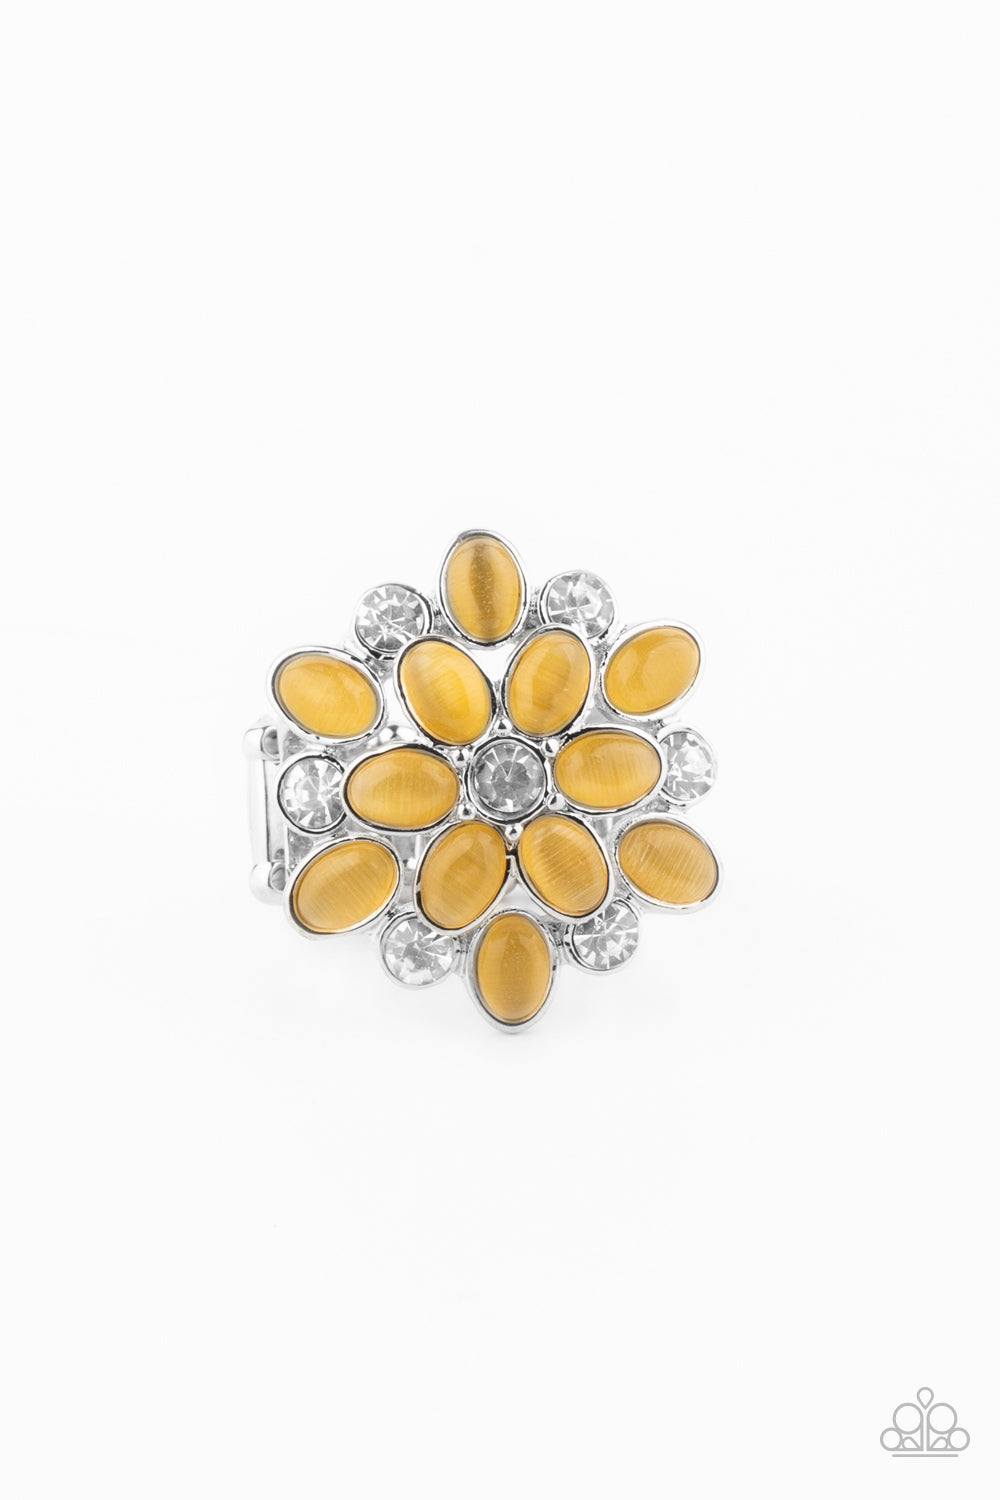 Layers of glassy white rhinestones and glowing yellow cat's eye stone petals stack into a whimsically colorful floral centerpiece atop the finger. Features a stretchy band for a flexible fit.